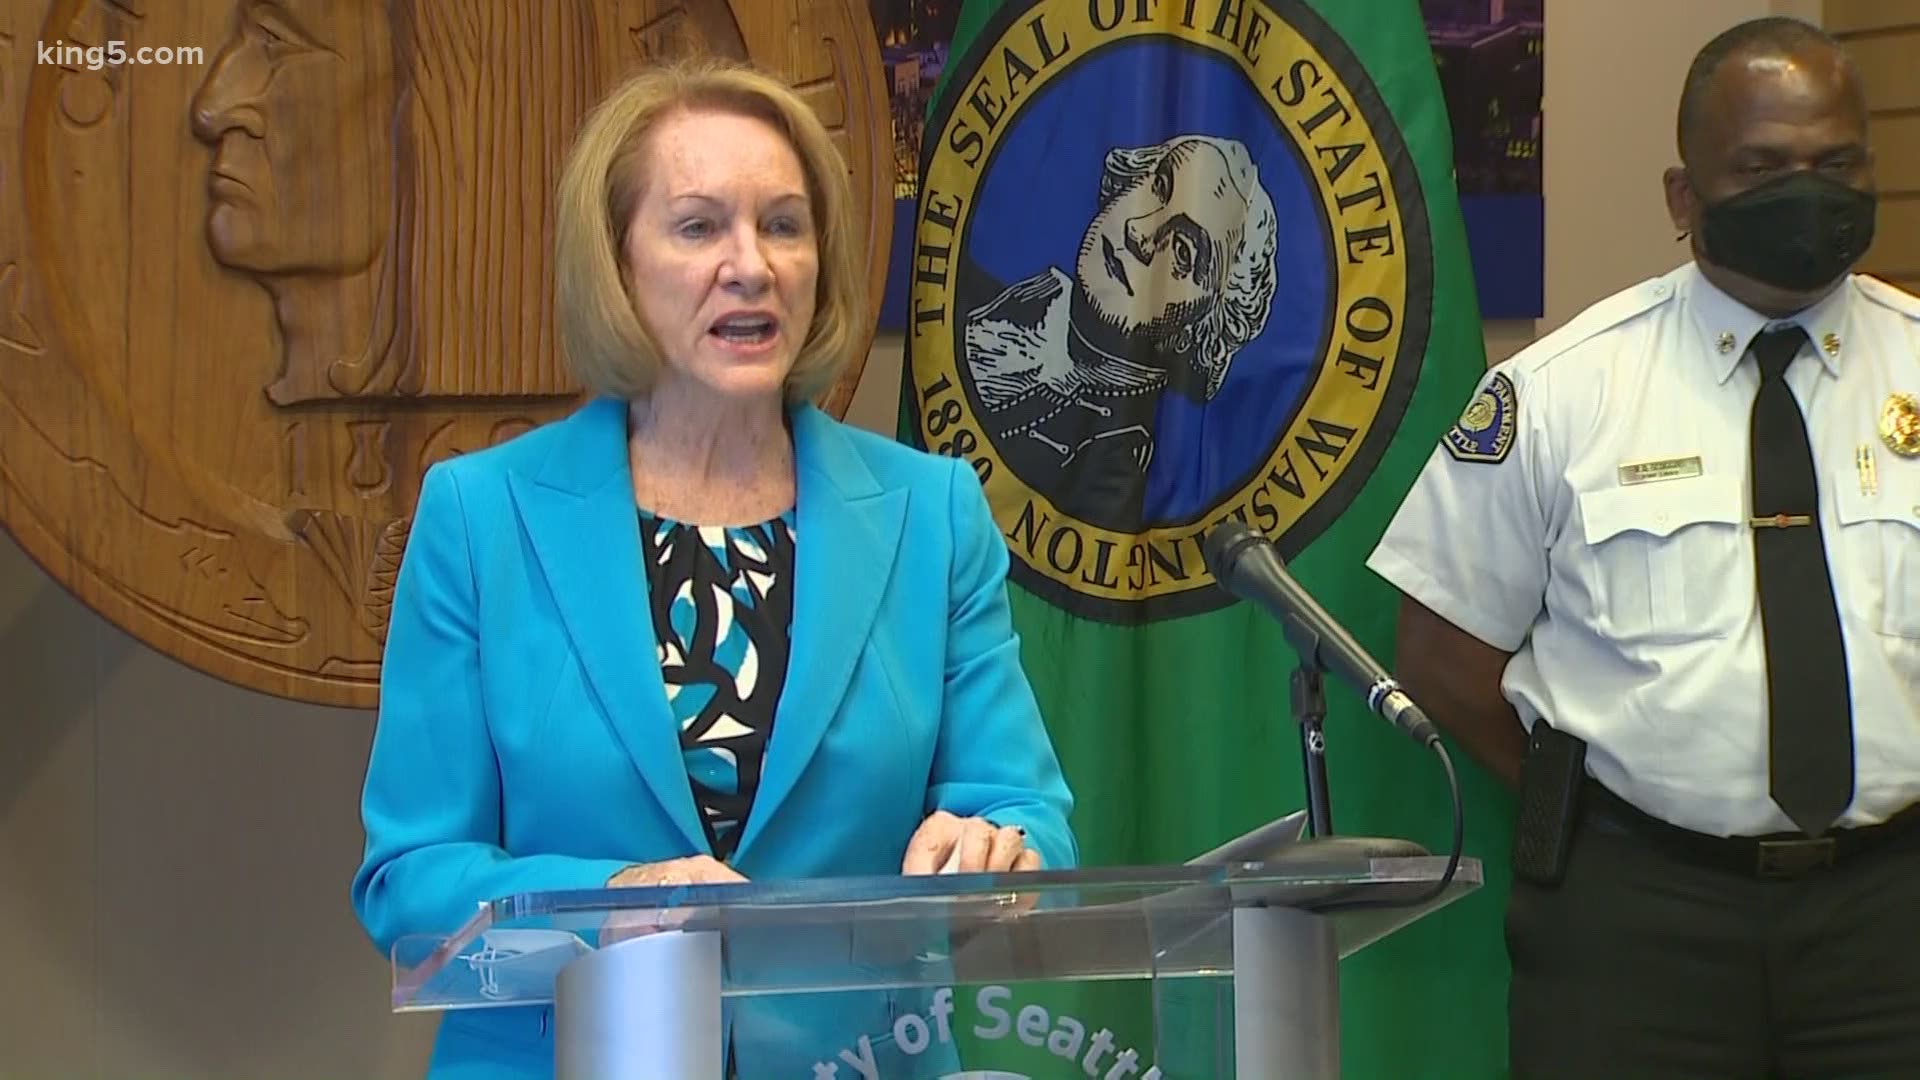 Seattle Mayor Jenny Durkan is blasting the City Council's plan to cut the police department’s budget by 50% and instead proposed transferring some police functions.